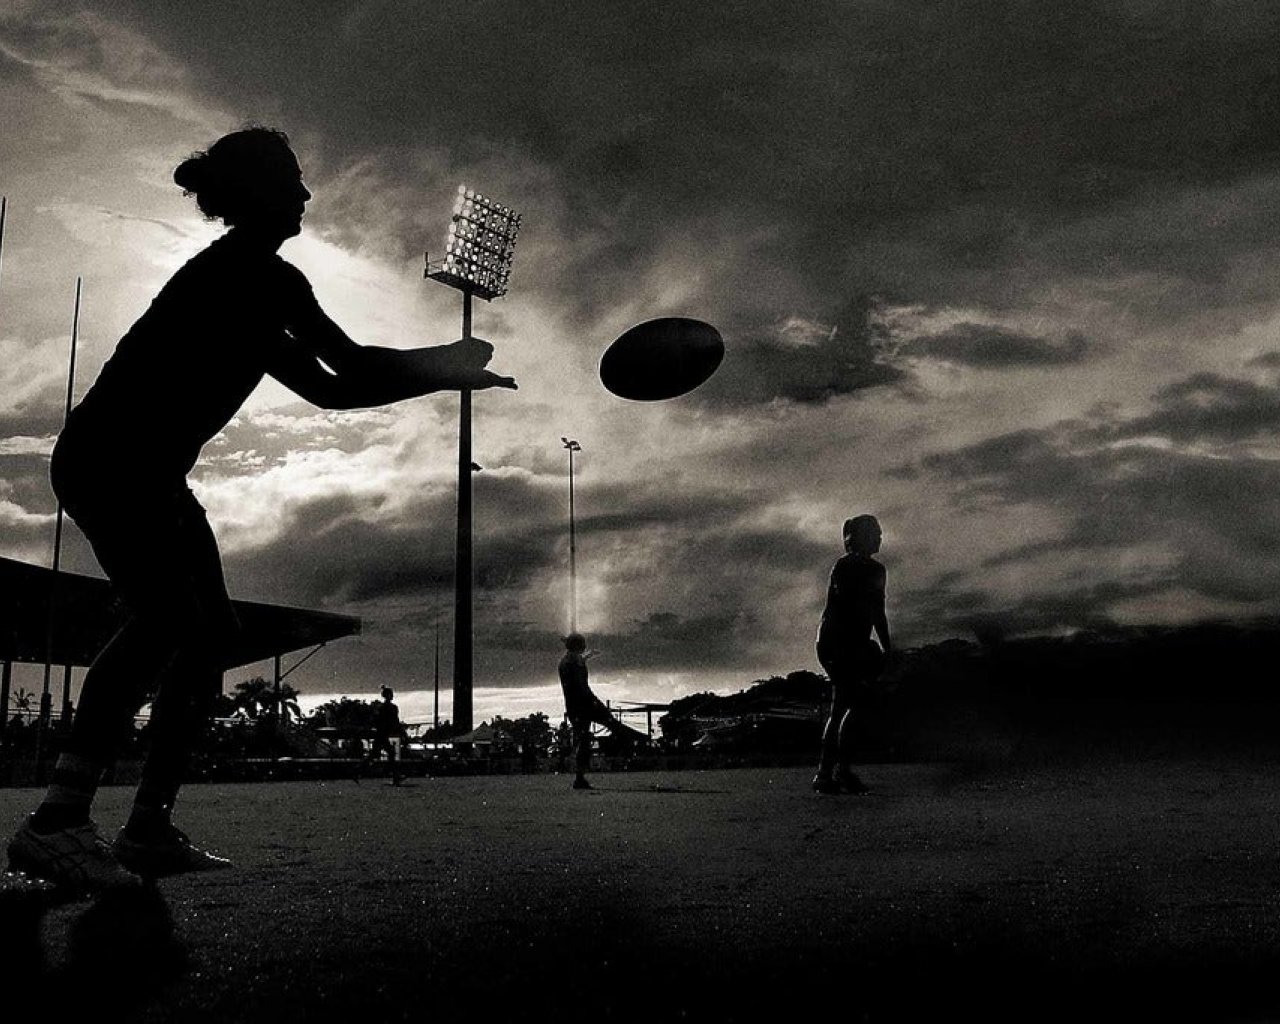 NAB AFL Women’s Competition